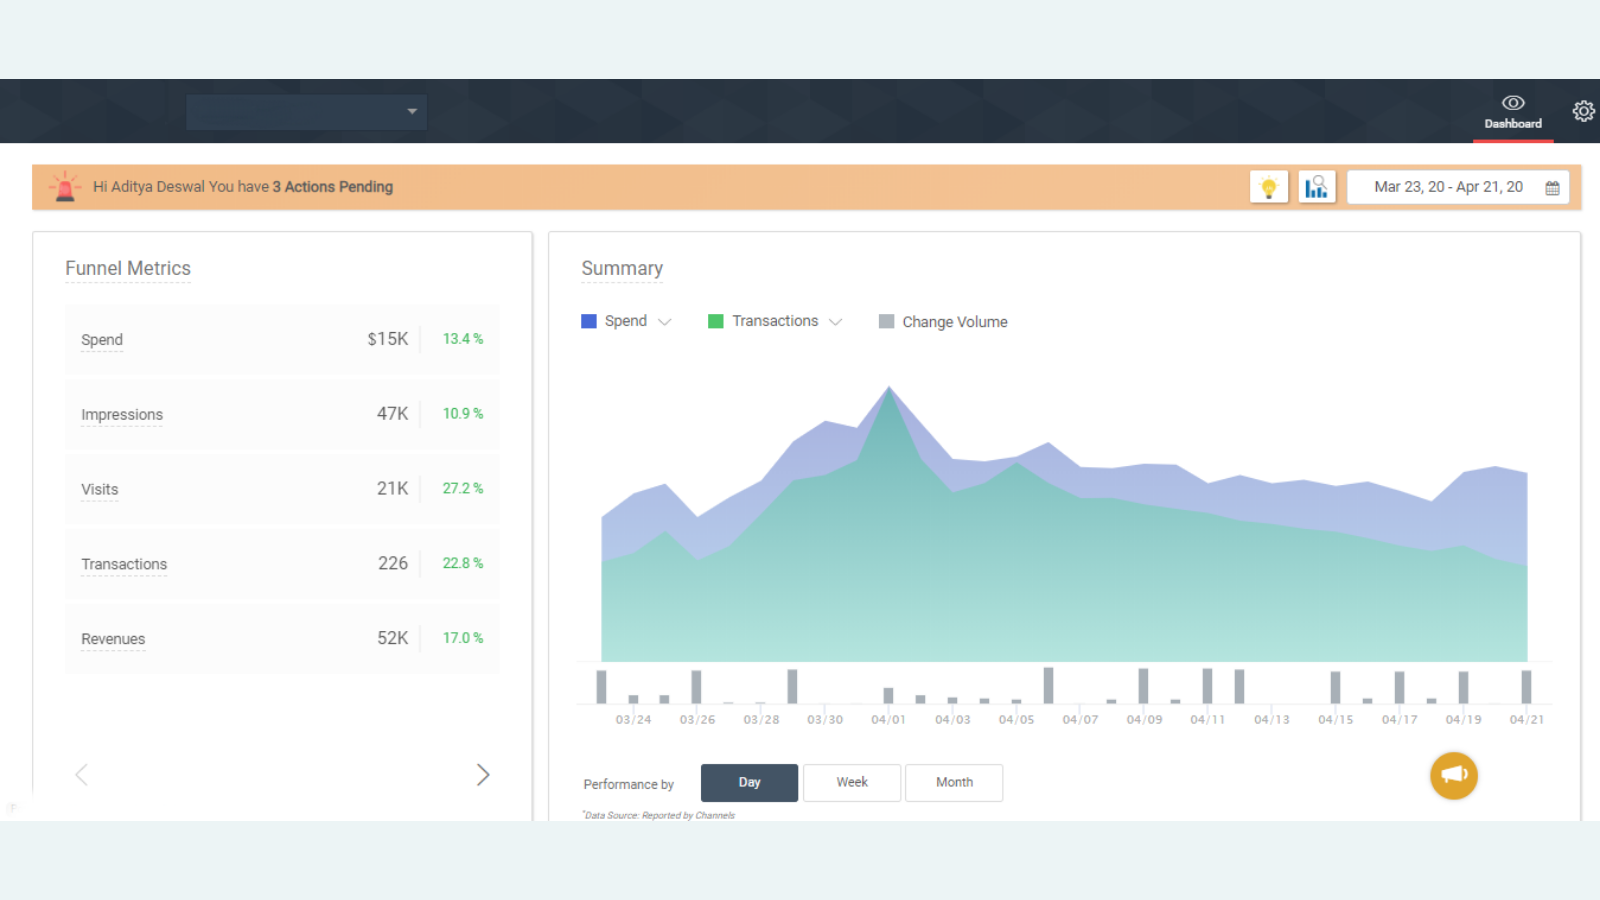 Monitor your campaigns using Funnel Metrics &Performance Summary